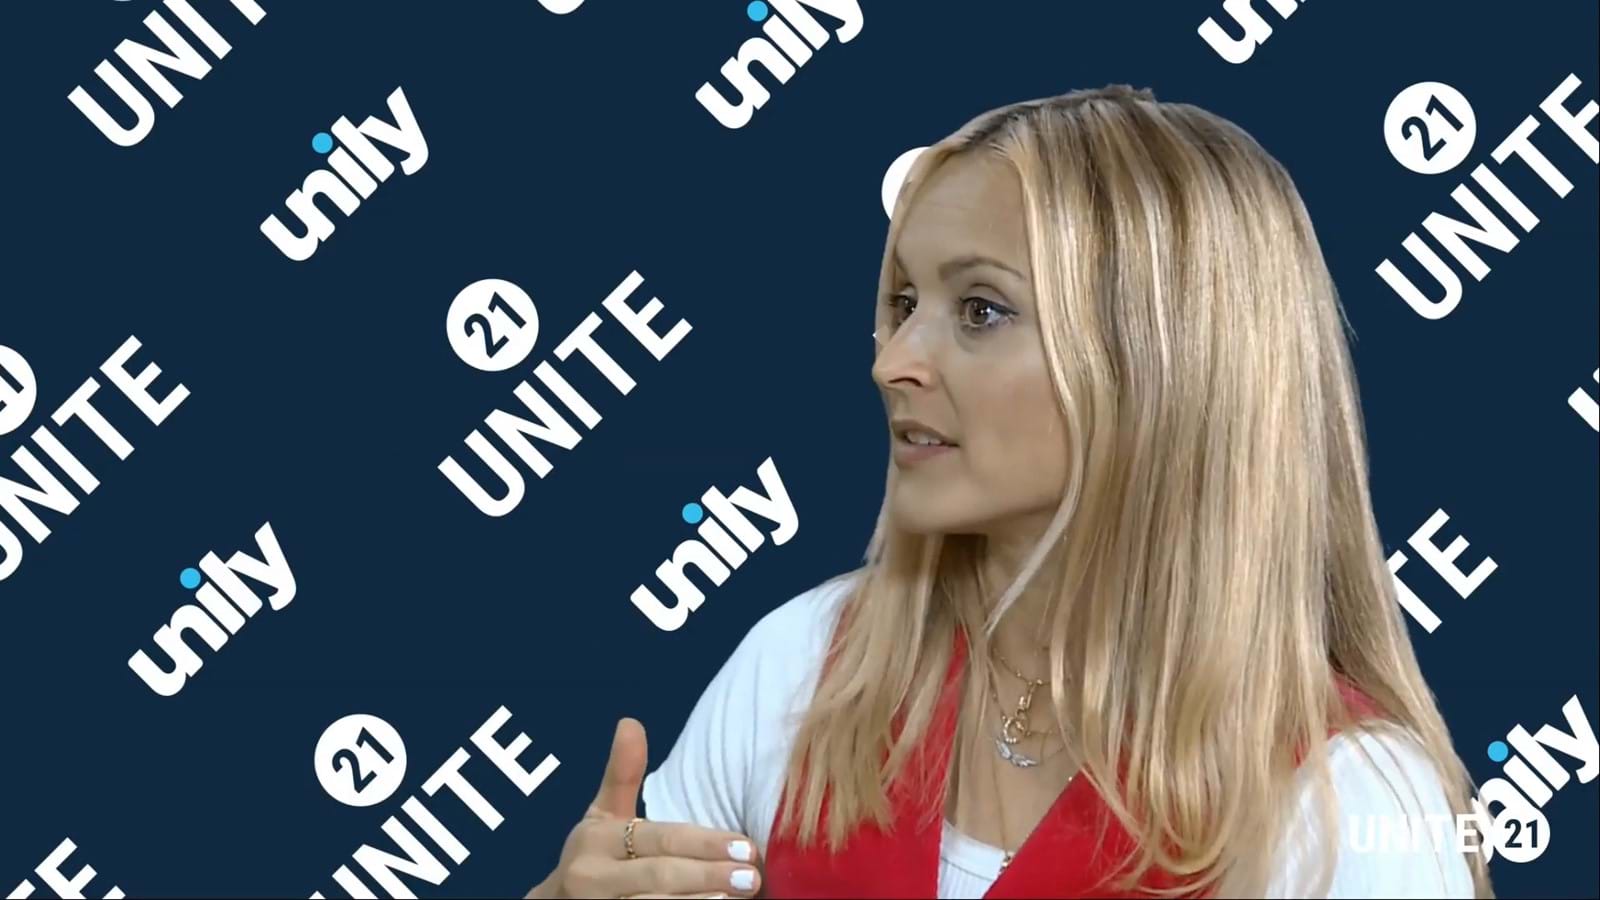 Fearn Cotton at Unite 21 employee experience conference